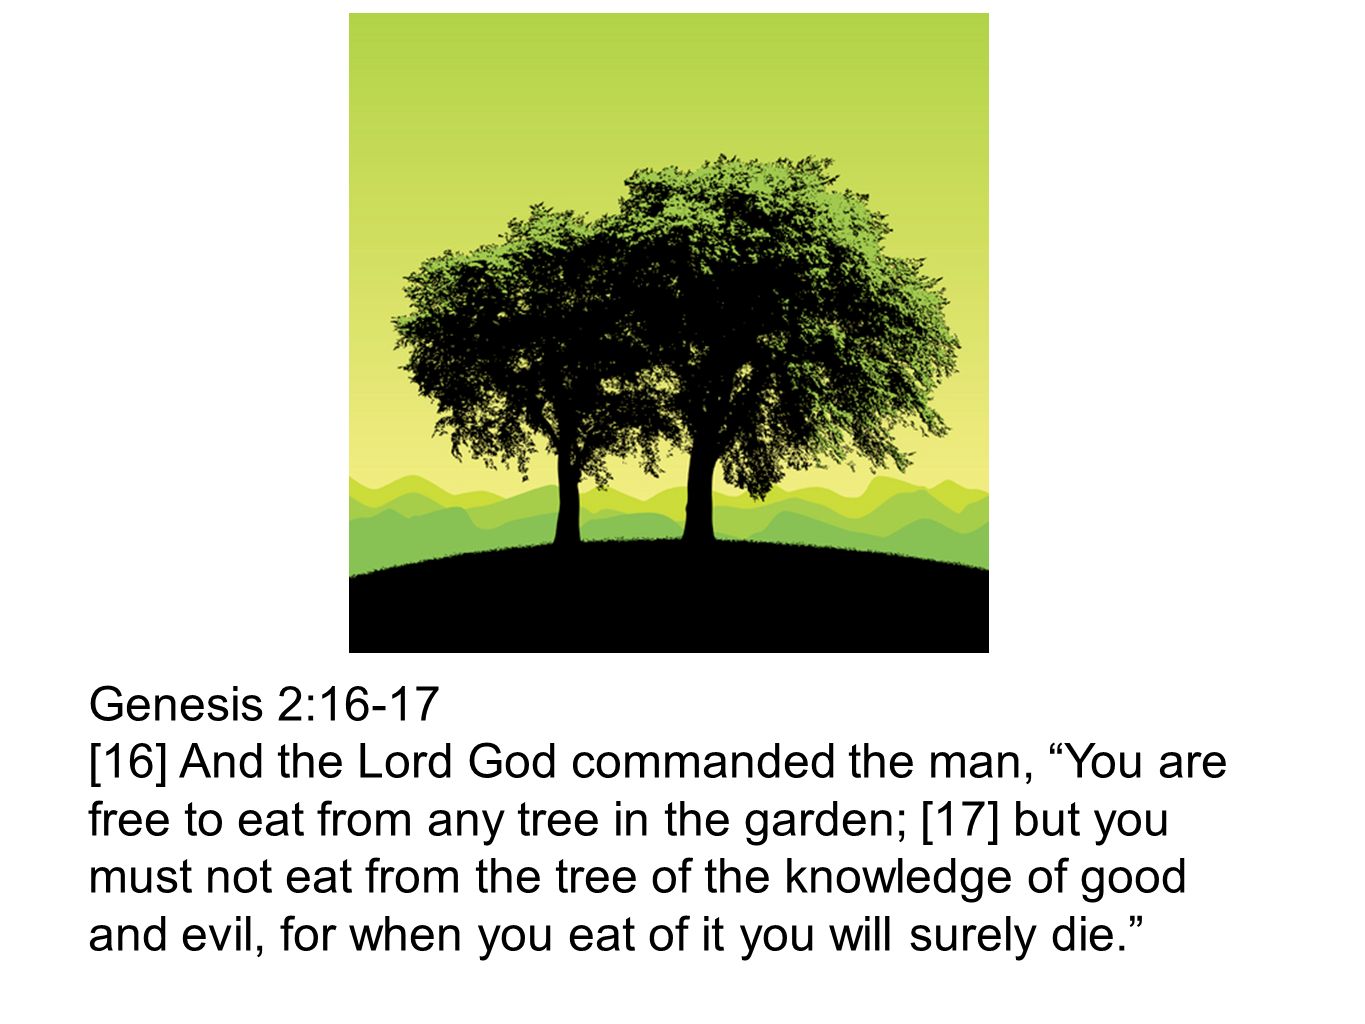 Genesis 2:16-17 [16] And the Lord God commanded the man, You are free to eat from any tree in the garden; [17] but you must not eat from the tree of the knowledge of good and evil, for when you eat of it you will surely die.